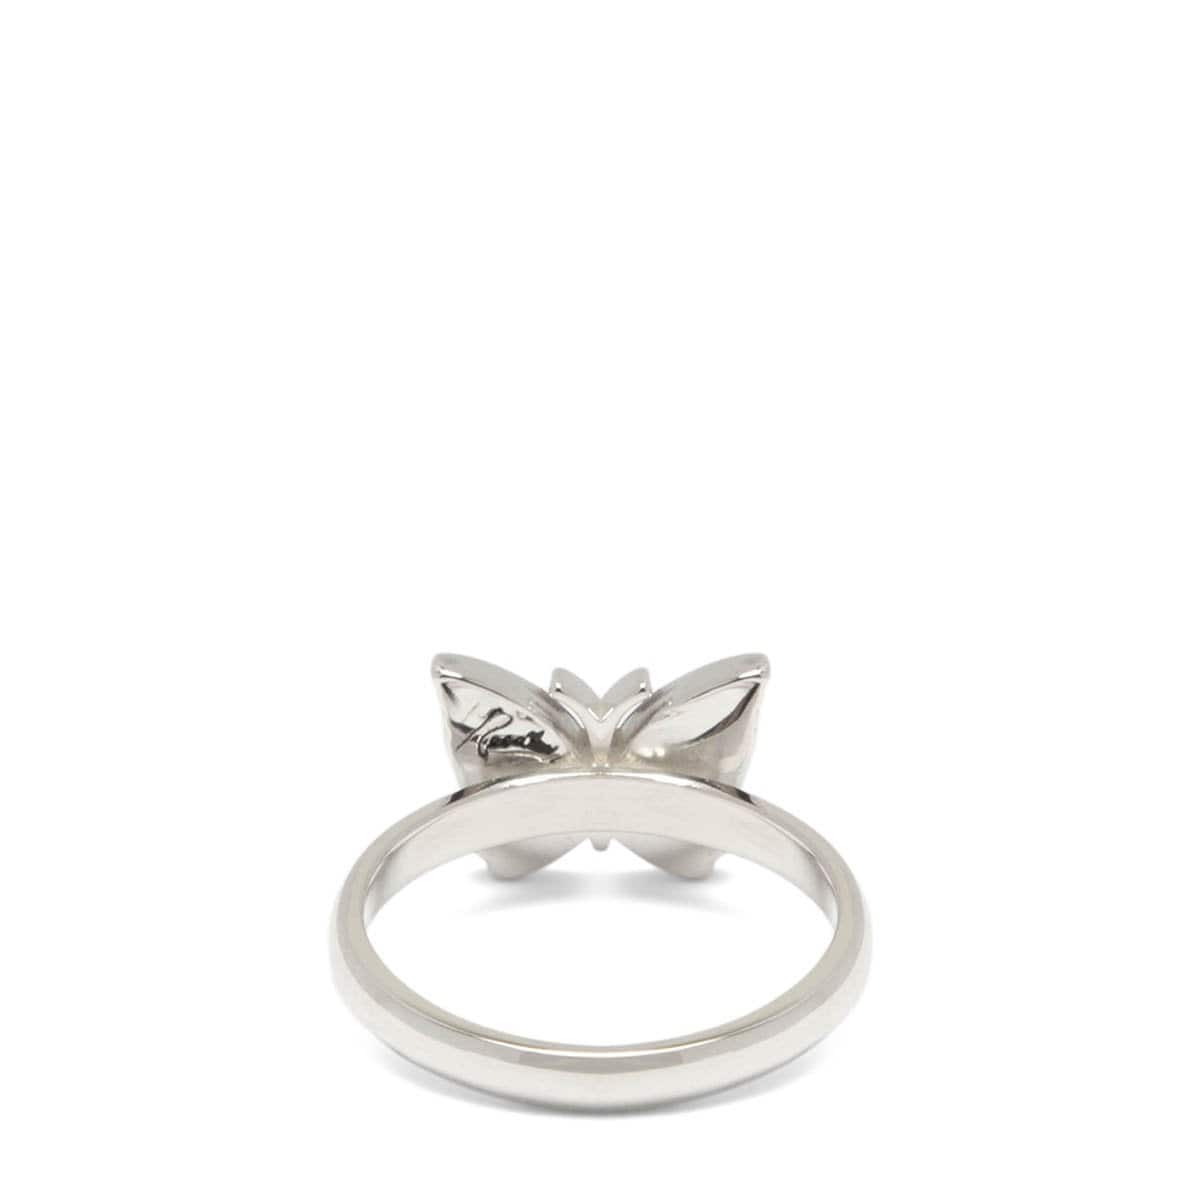 Needles Bags & Accessories PAPILLON RING